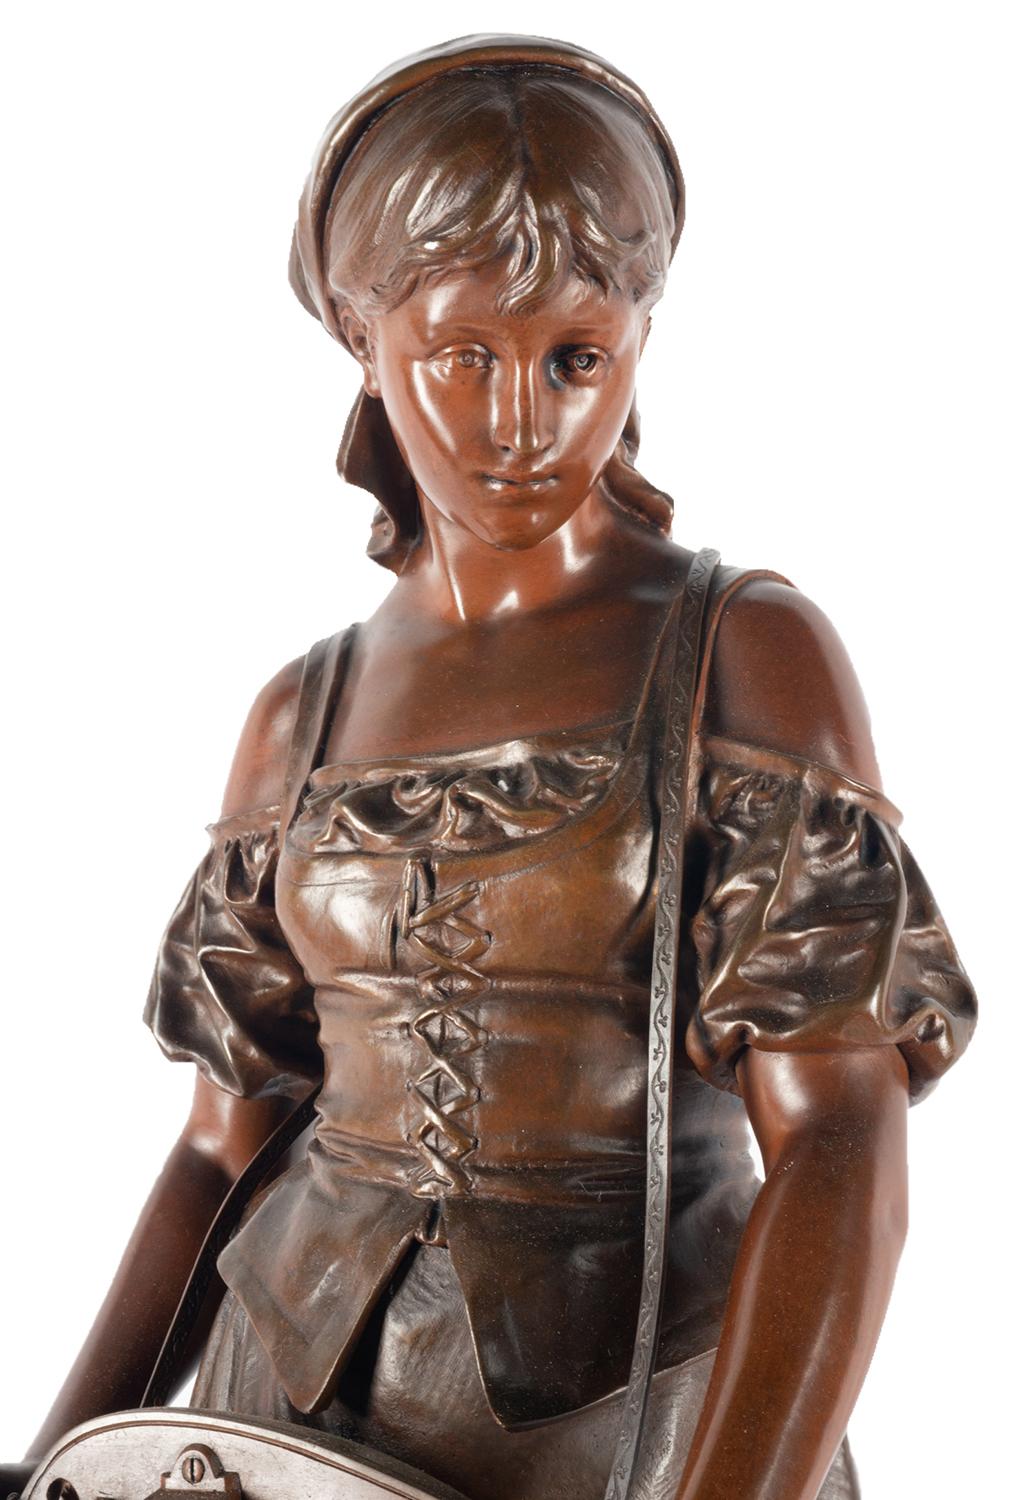 A very good quality 19th century patinated bronze statue of a gypsy girl 'Tuning the Mandolin'
Signed; Bouret.
Eutrope Bouret (16 April 1833 in Paris – 1906) was a 19th century French sculptor.
Eutrope Bouret was a student of Louis Buhot. He